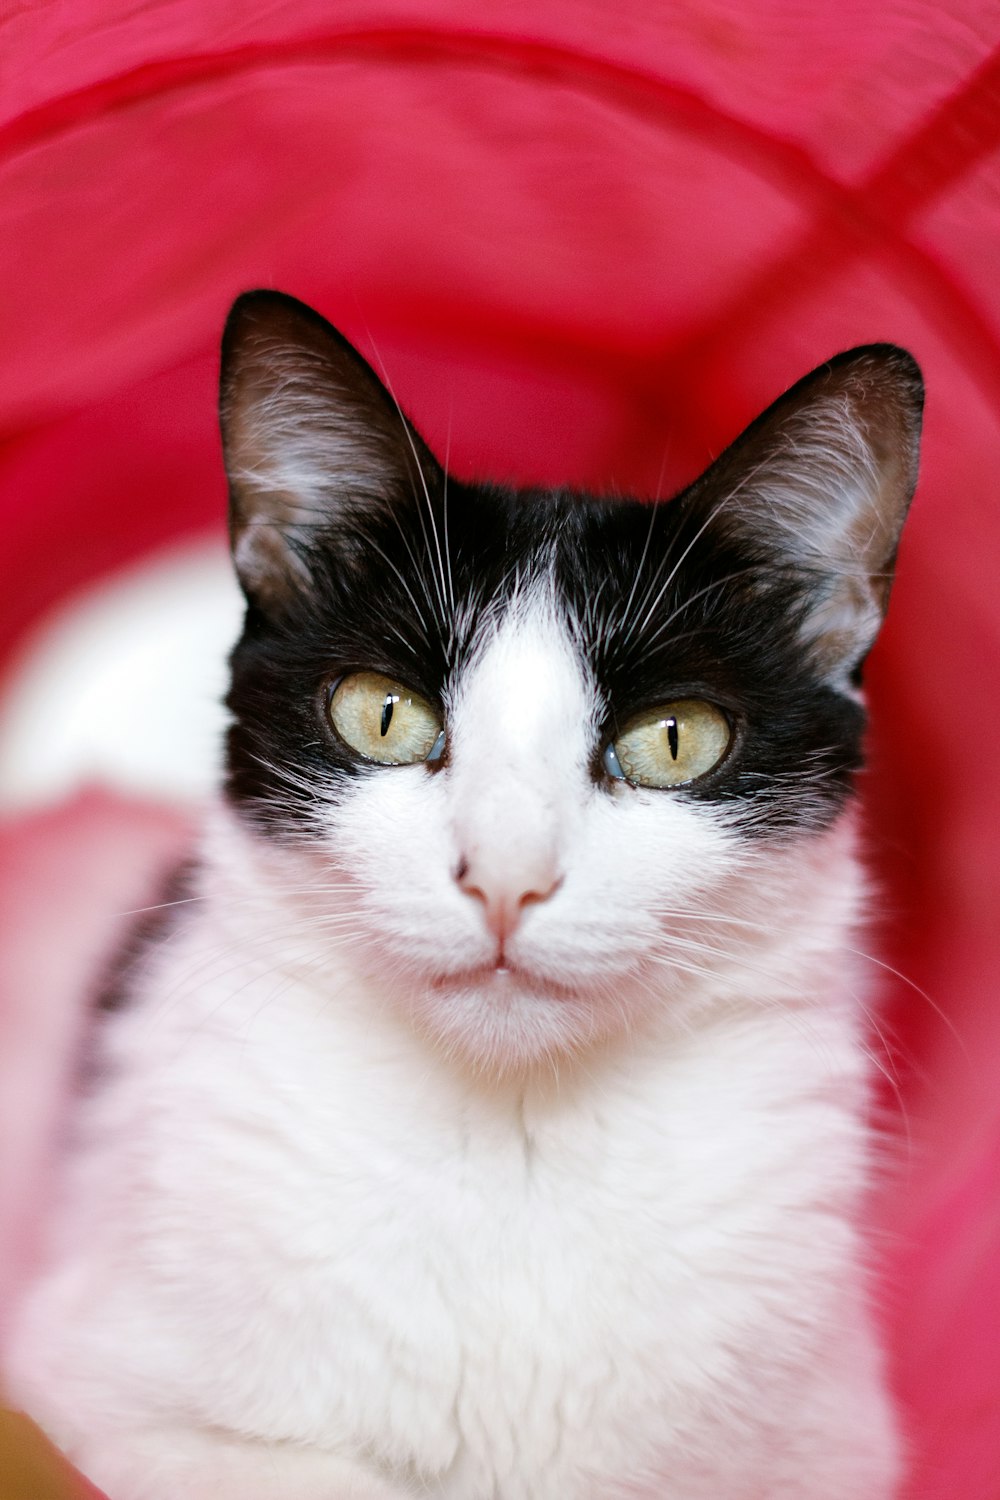 a black and white cat sitting in a red cloth